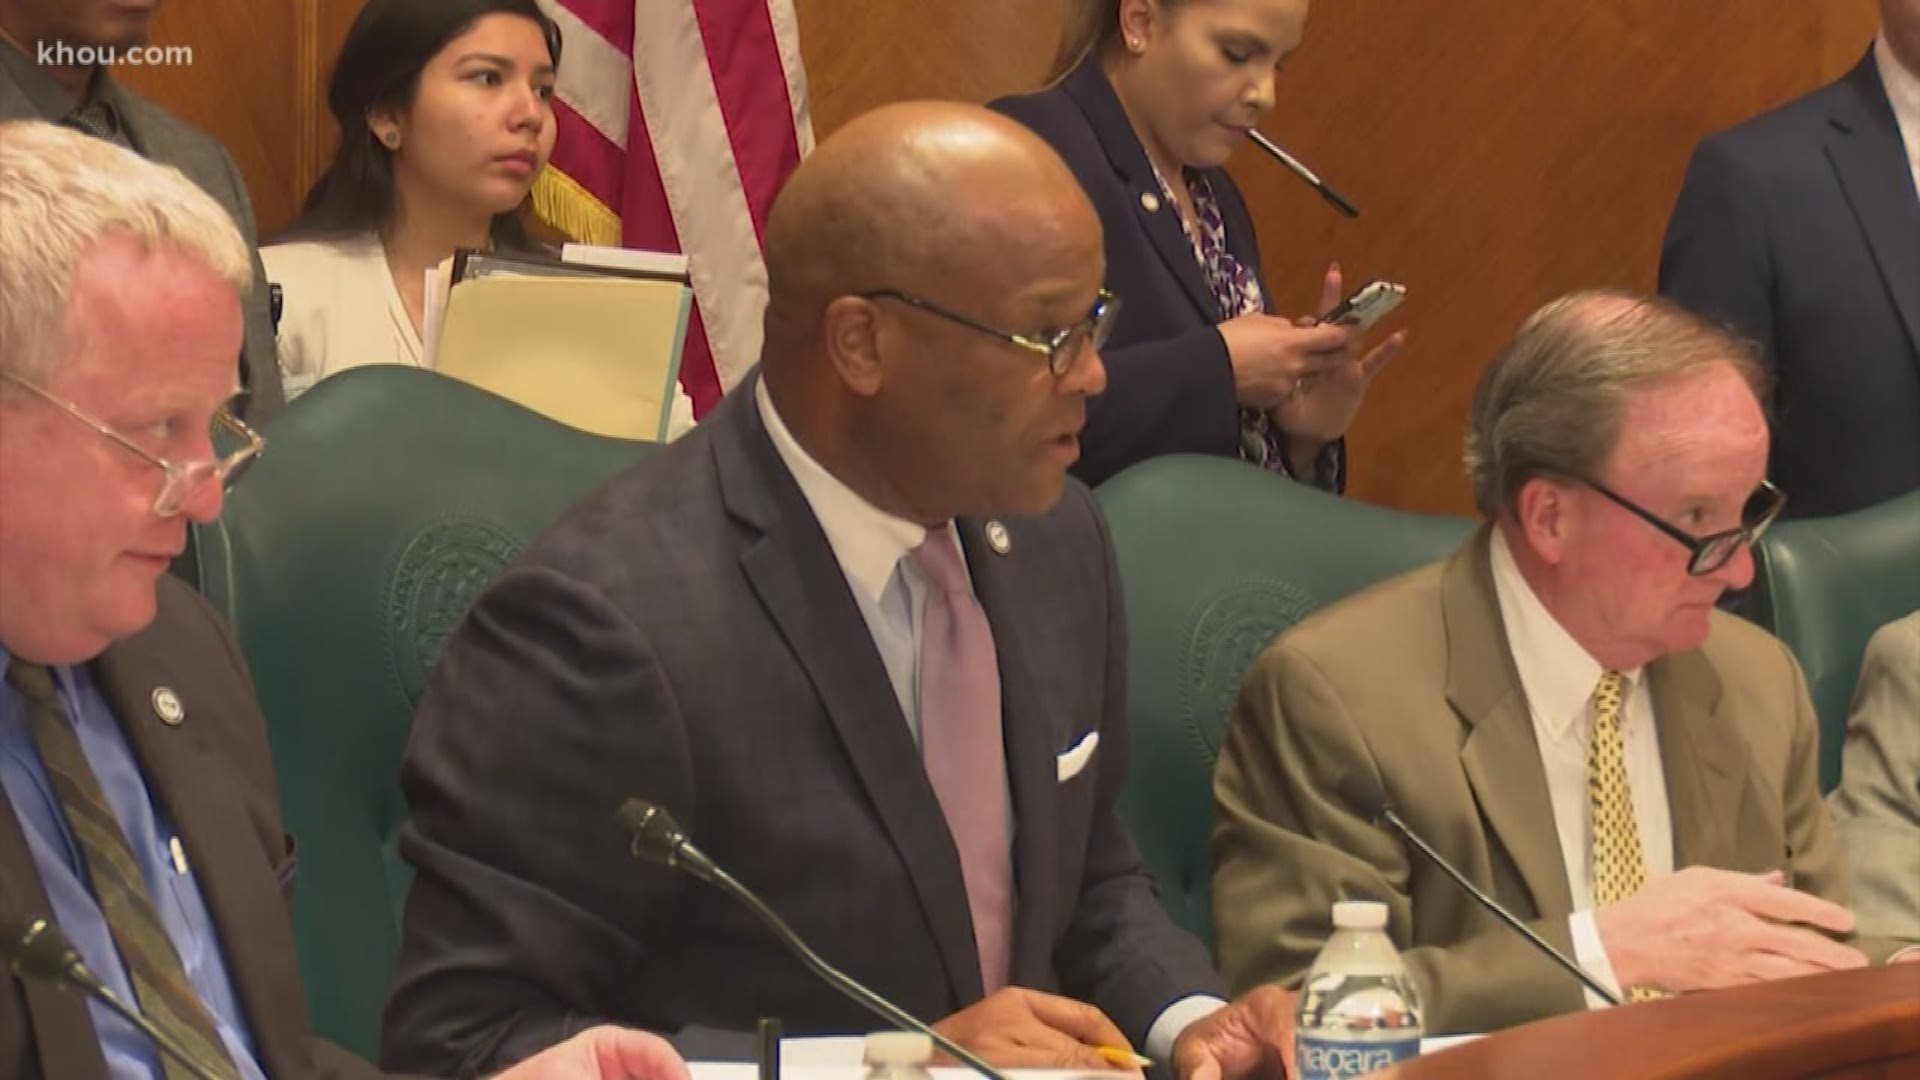 The Houston mayoral race could be getting more crowded. Councilman Dwight Boykins filed paperwork for a potential run but he hasn't made an official announcement. If he decides to run, he'll go up against incumbent mayor Sylvester Turner, former mayor Bill King and attorney Tony Buzbee.